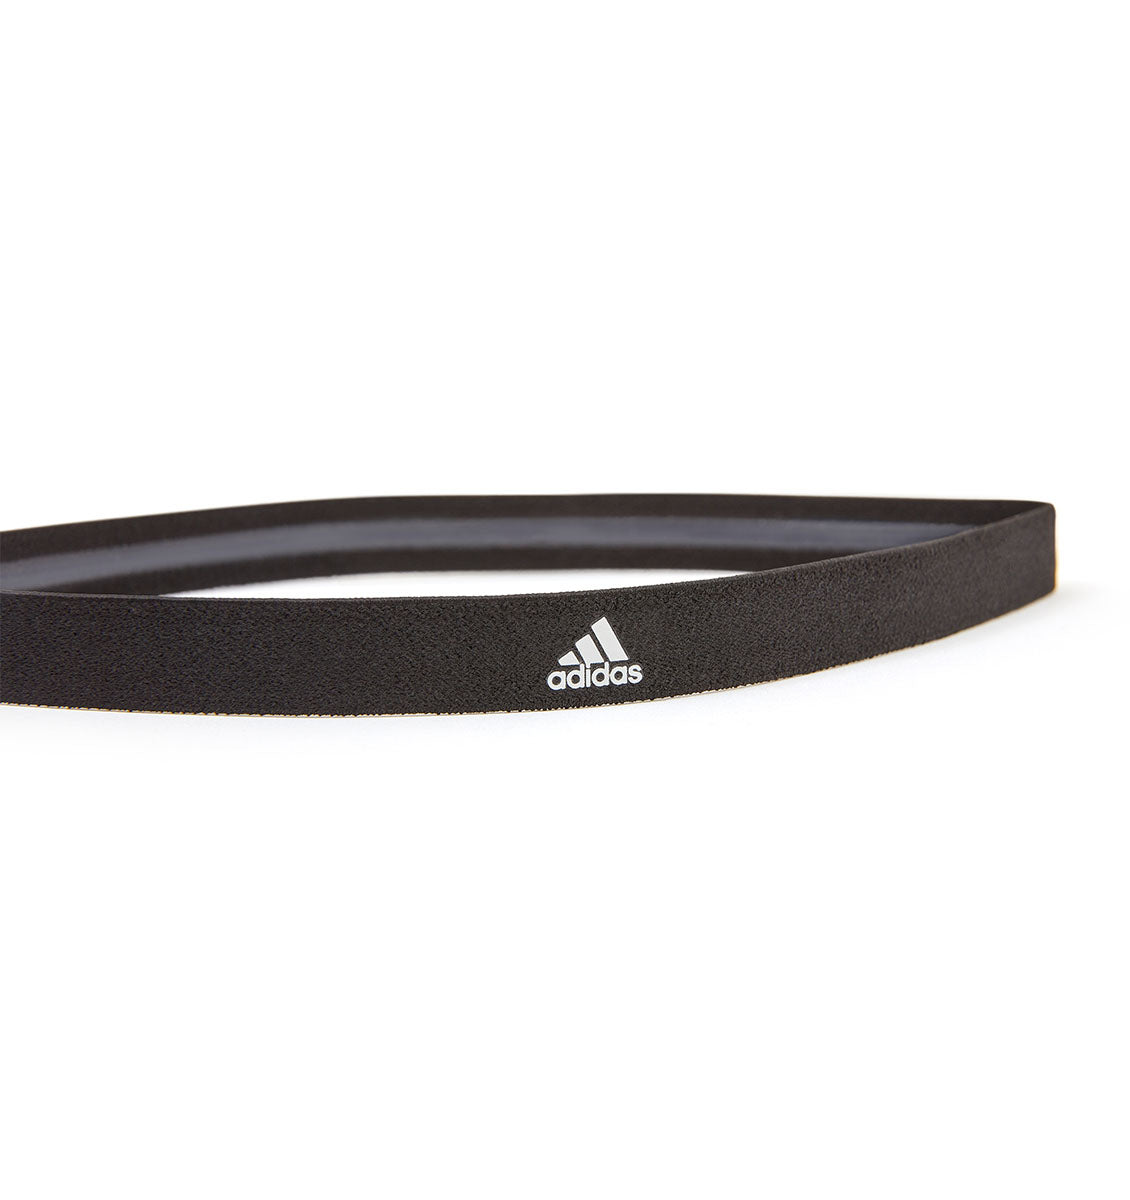 adidas Sports Hair Bands - Black/Grey/Powerberry (3 Pack) - 5